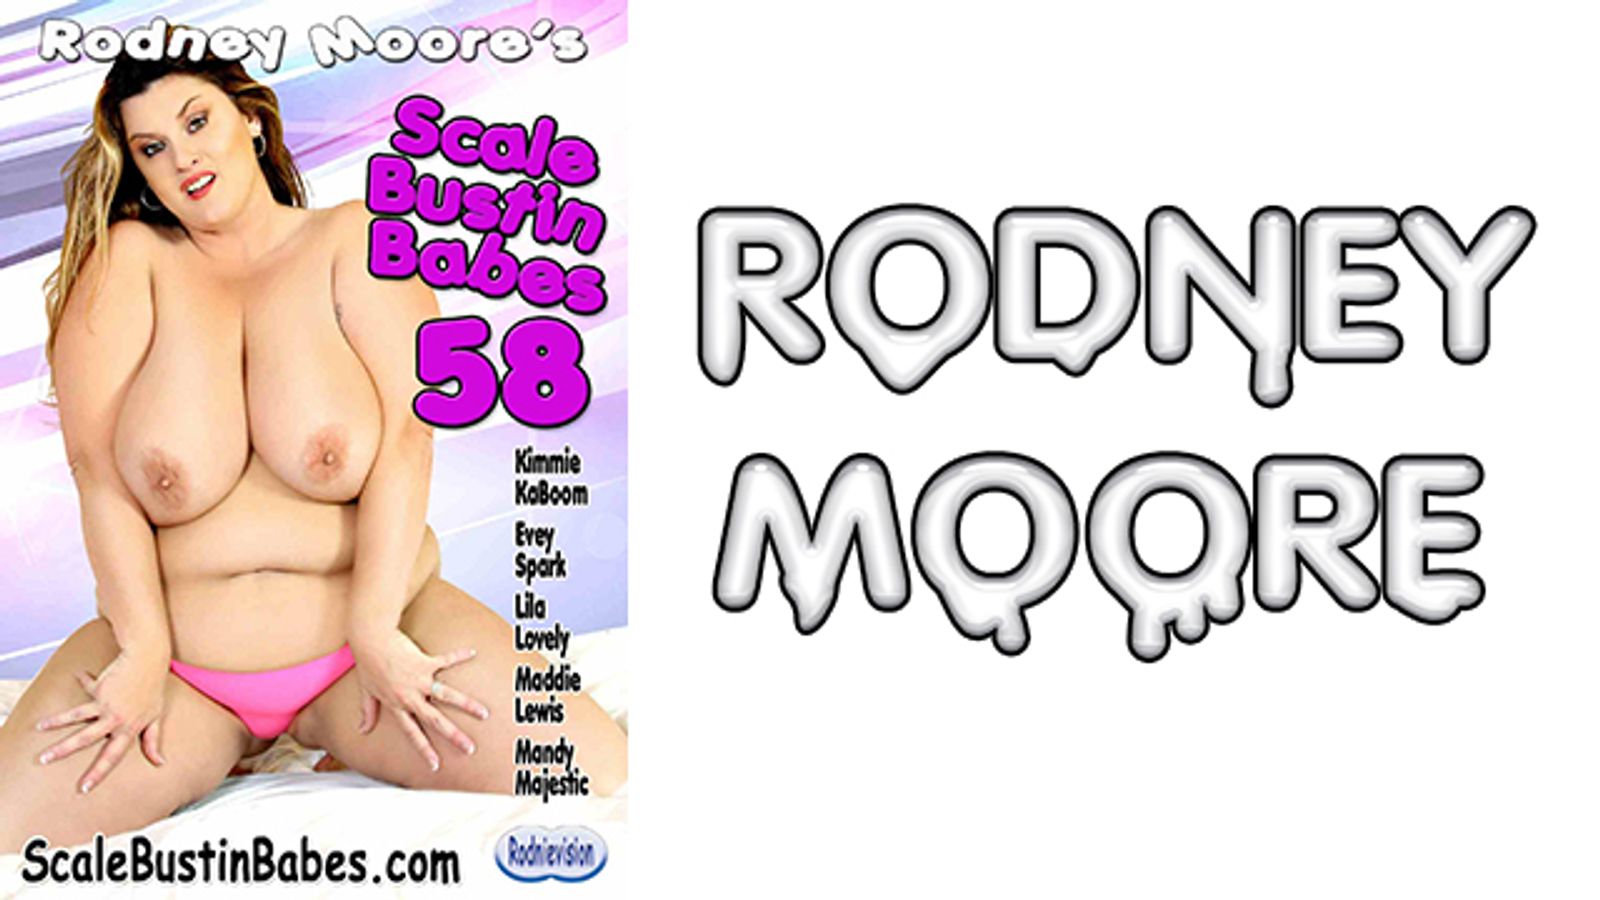 Rodney Moore Streets Hairy Girls & BBW Titles This Week